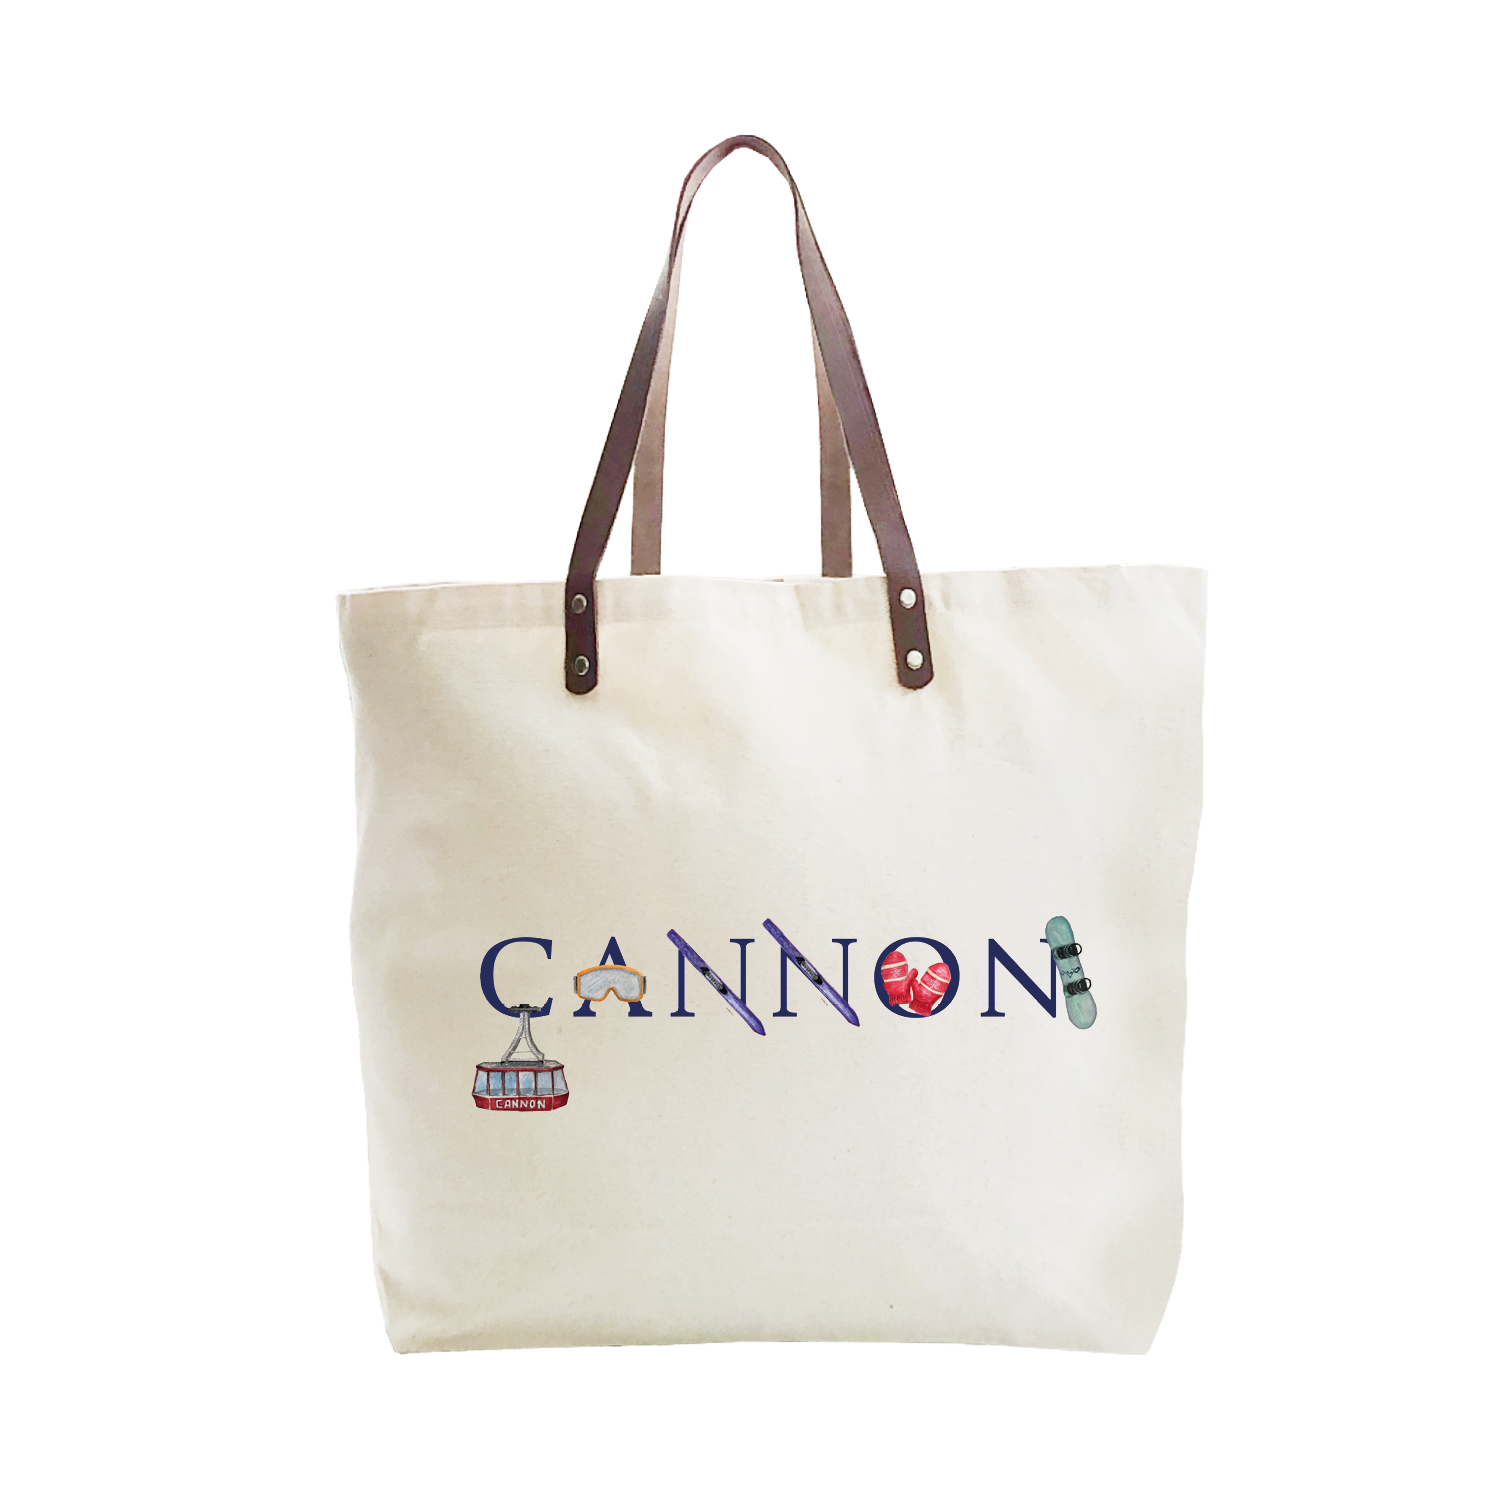 cannon large tote